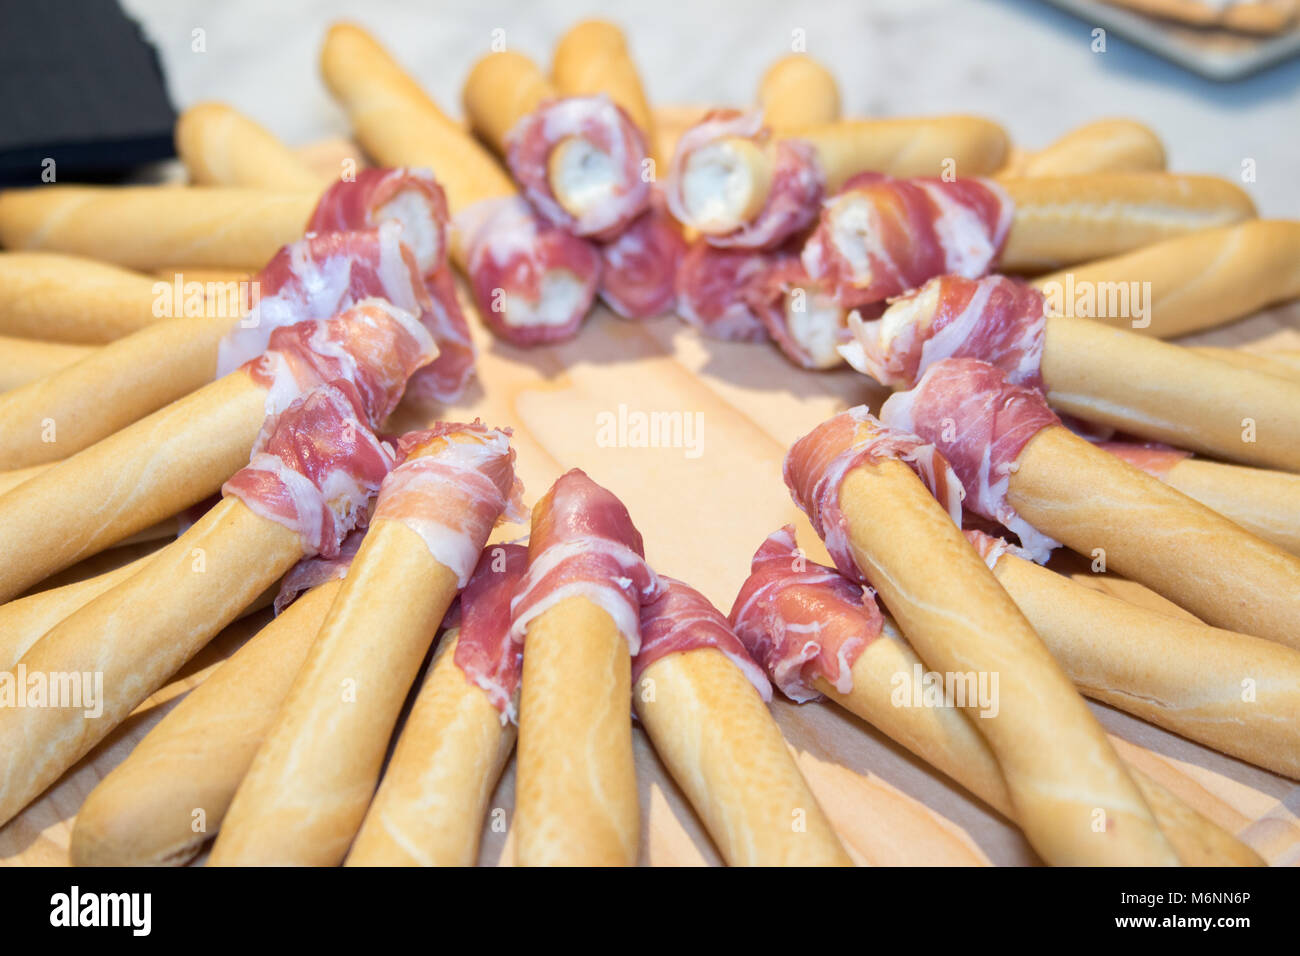 ham typical Italian dishes and products traditional Italian cuisine Stock Photo